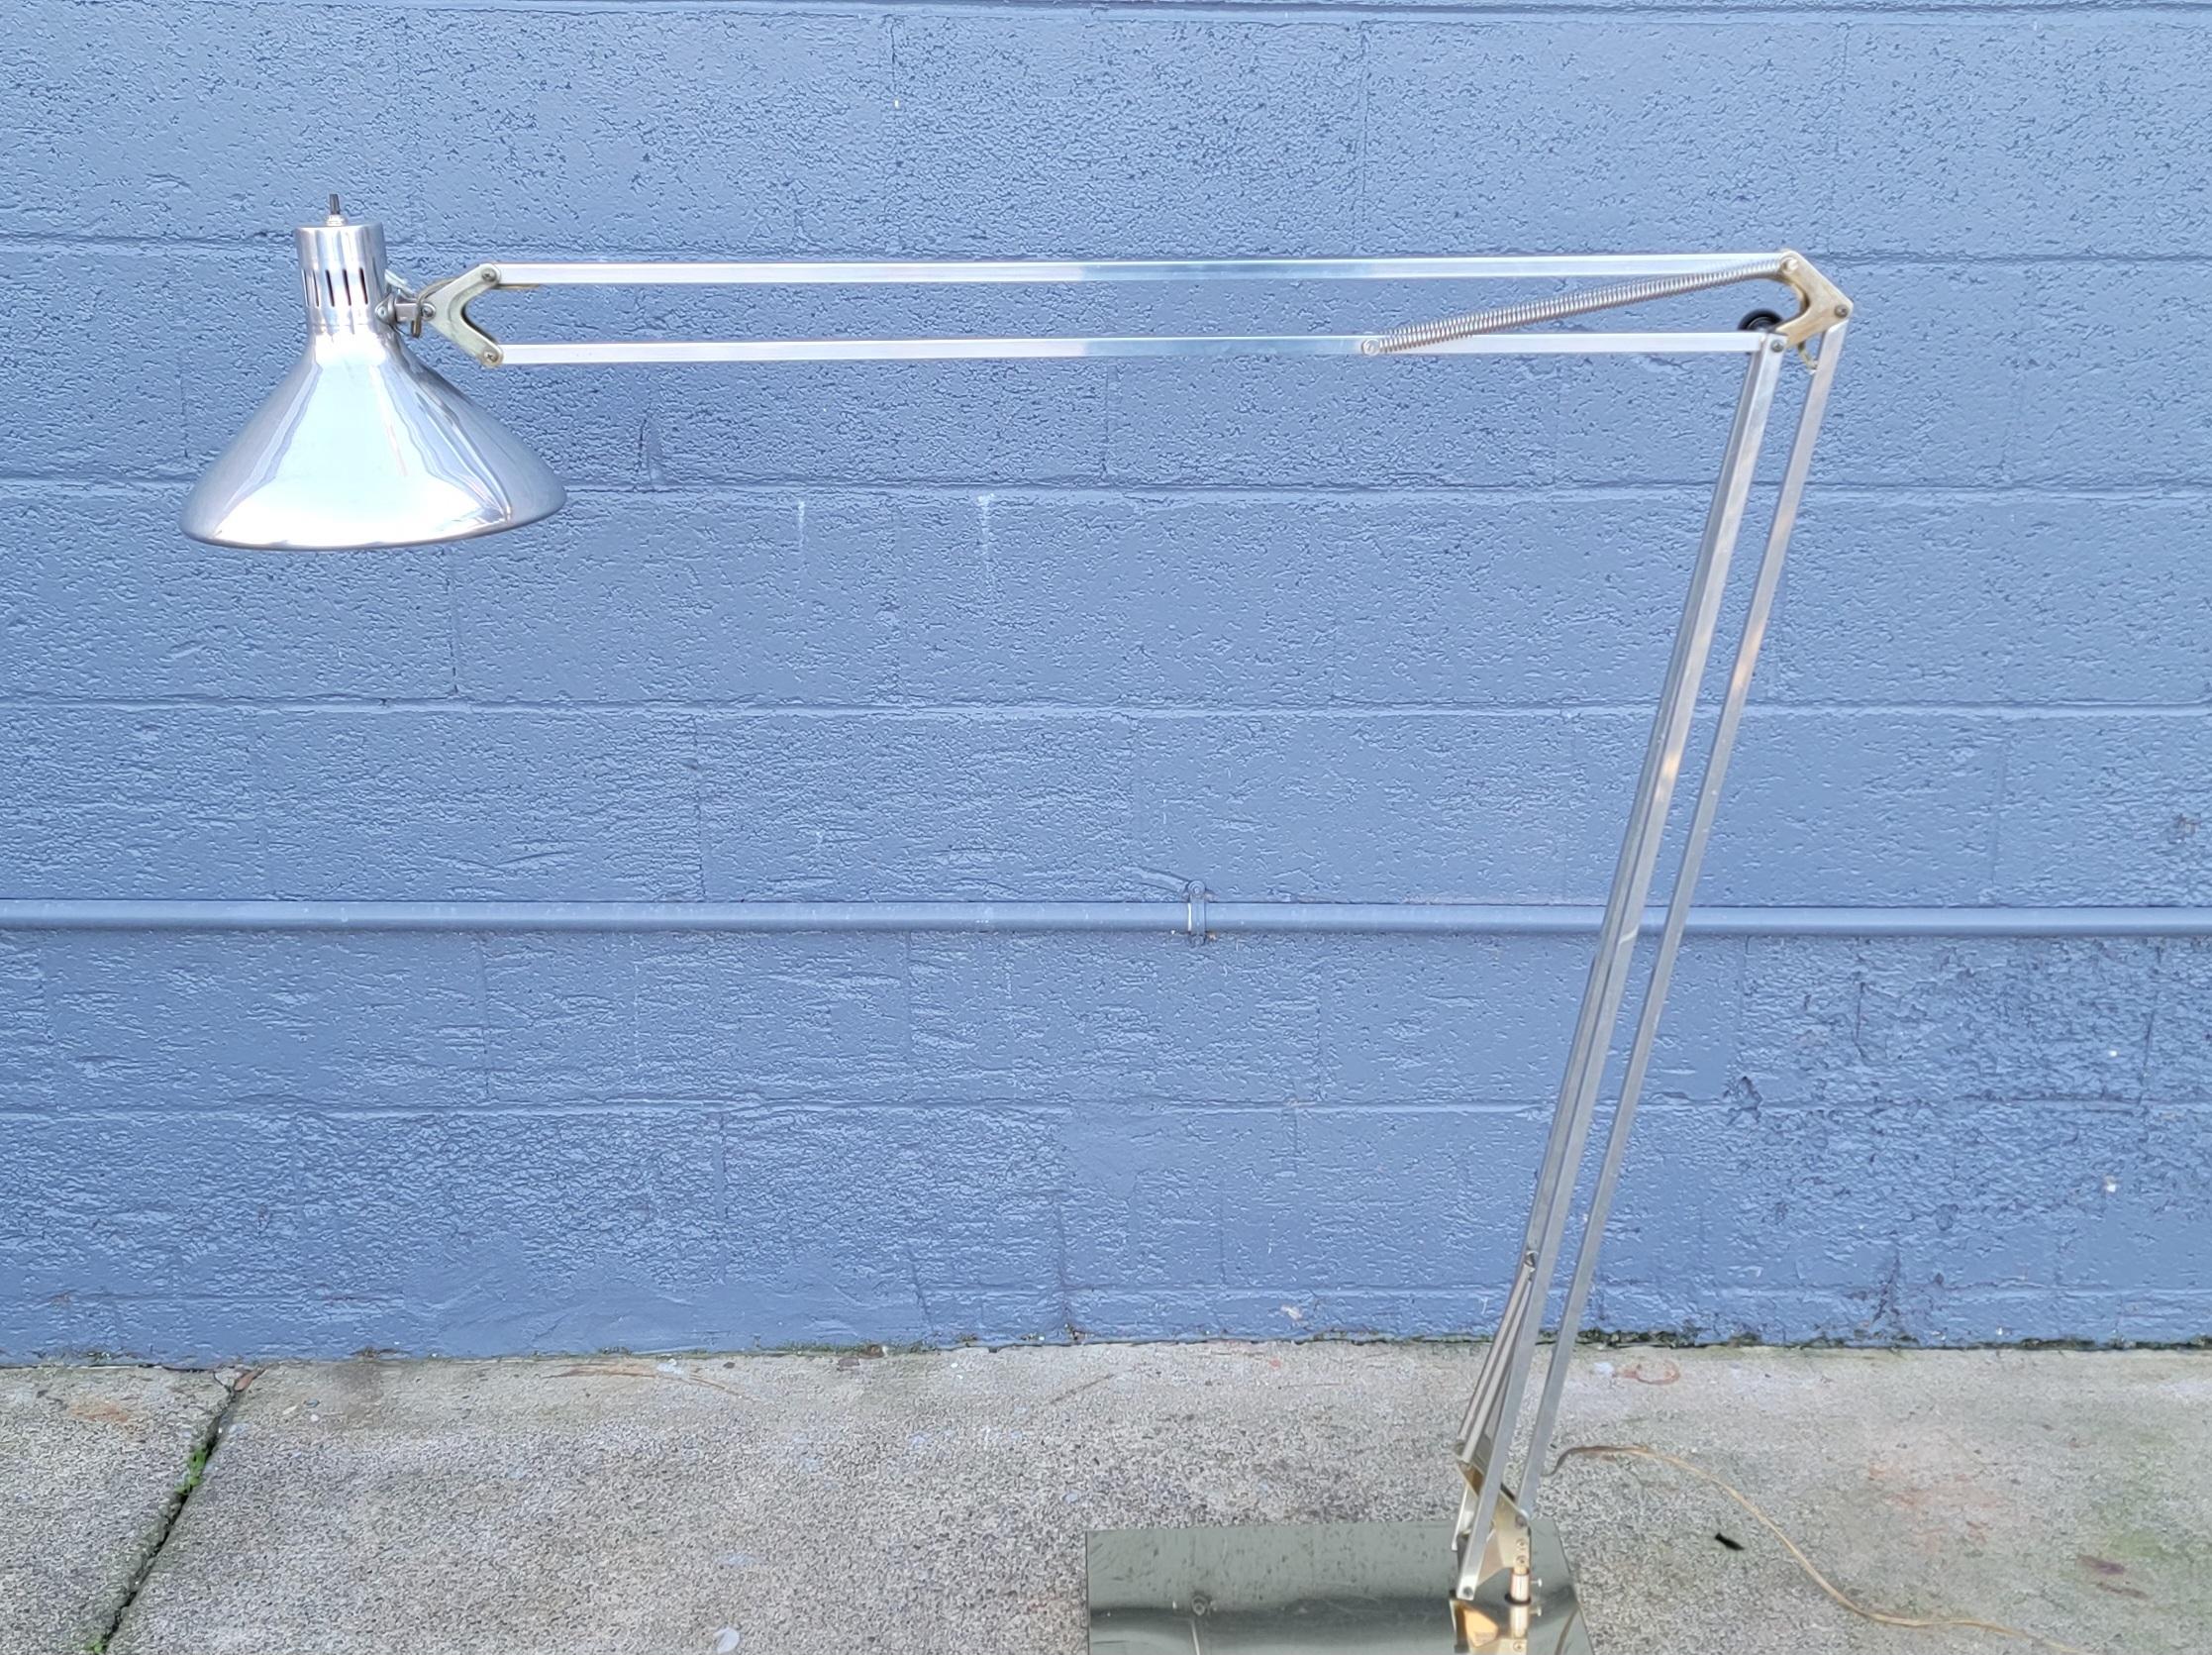 Adjustable floor or arc lamp made of aluminum with brass accents and brass base. Measurements of lamp vary depending on positioning. Measure: height ranges between 46-80 inches. Base measures 8.5 inches by 16 inches. Over-all very good condition